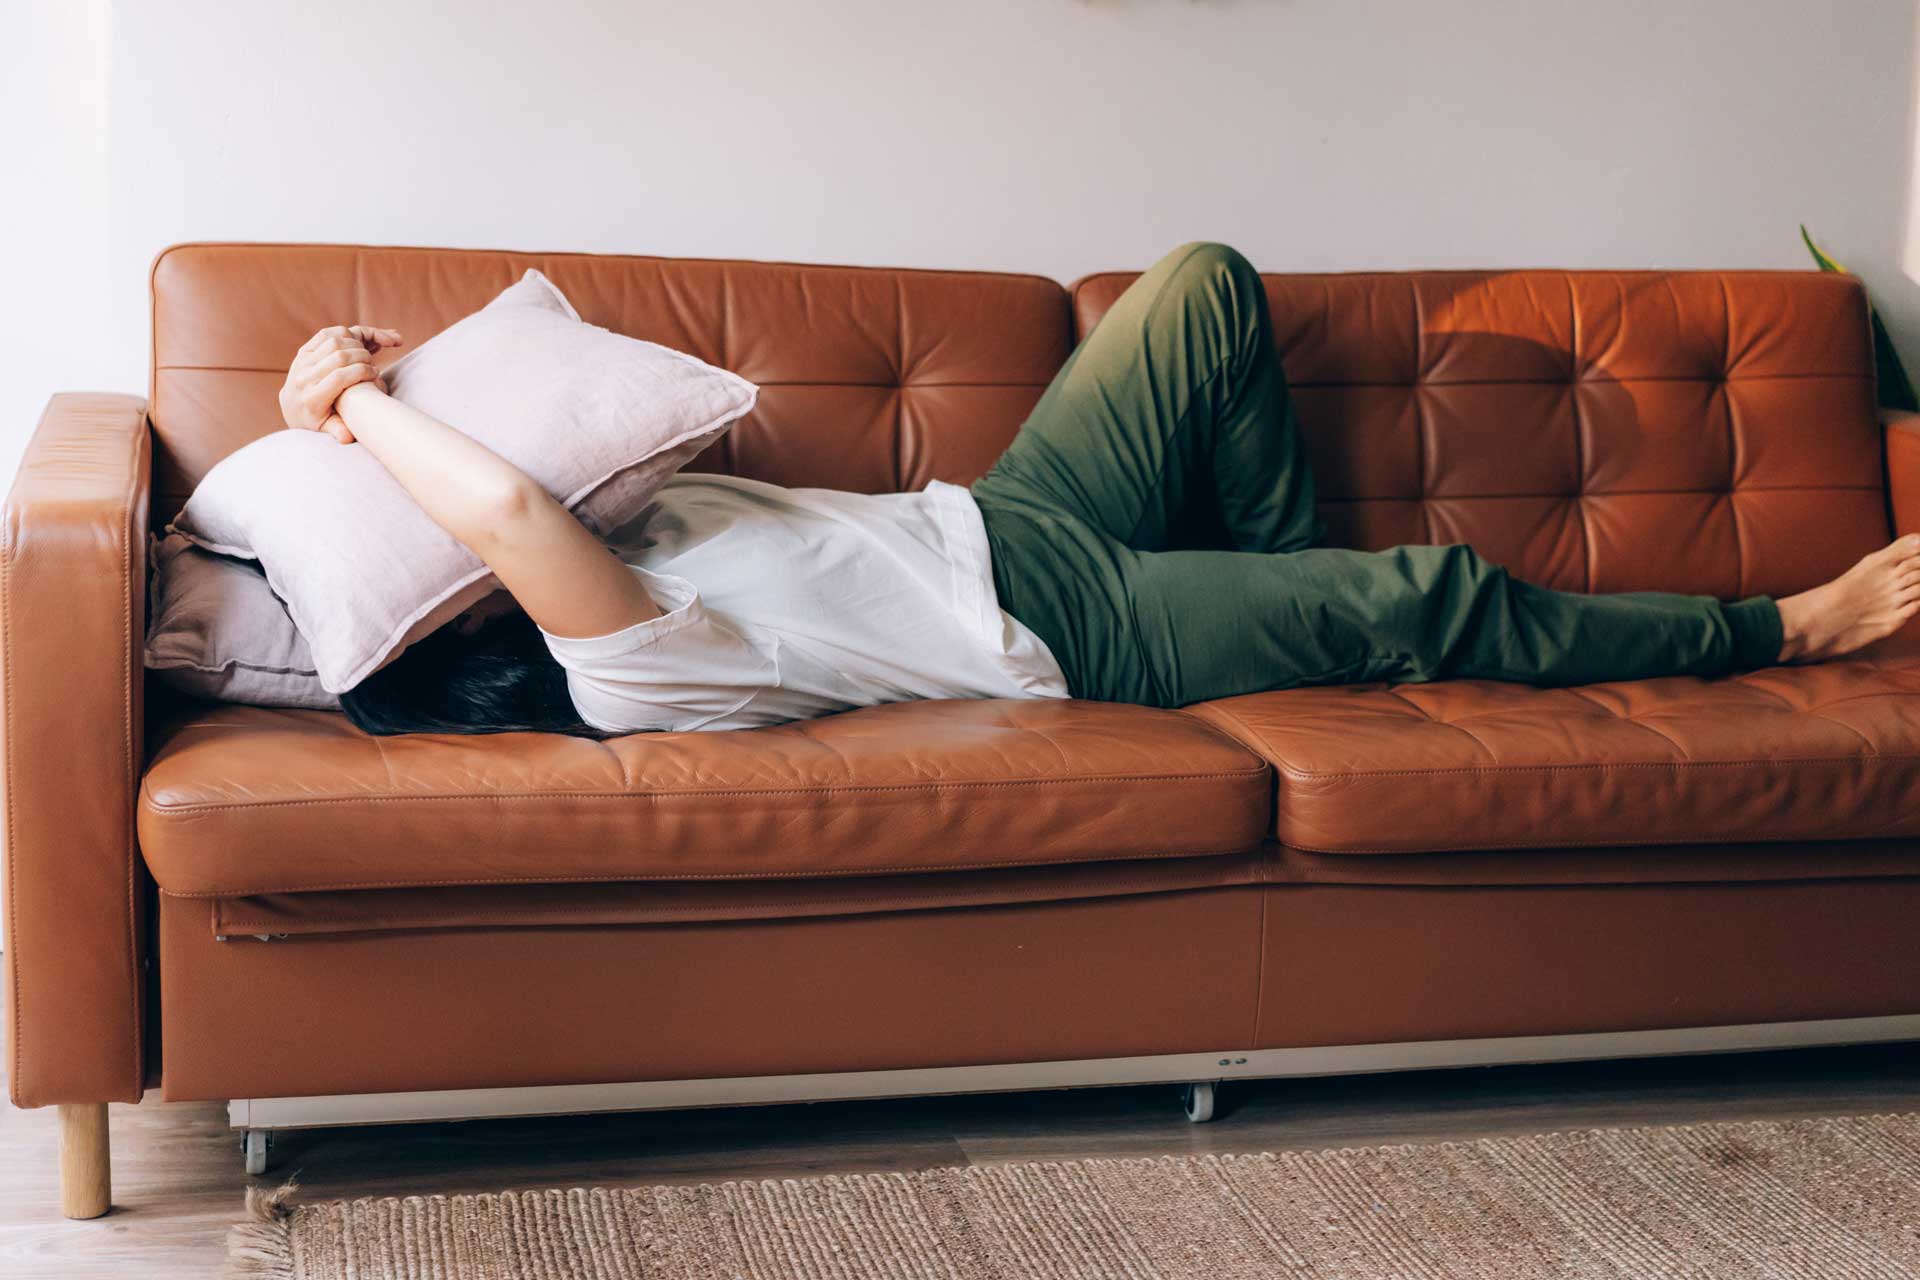 A depressed man covers his face with a pillow while laying on the couch.